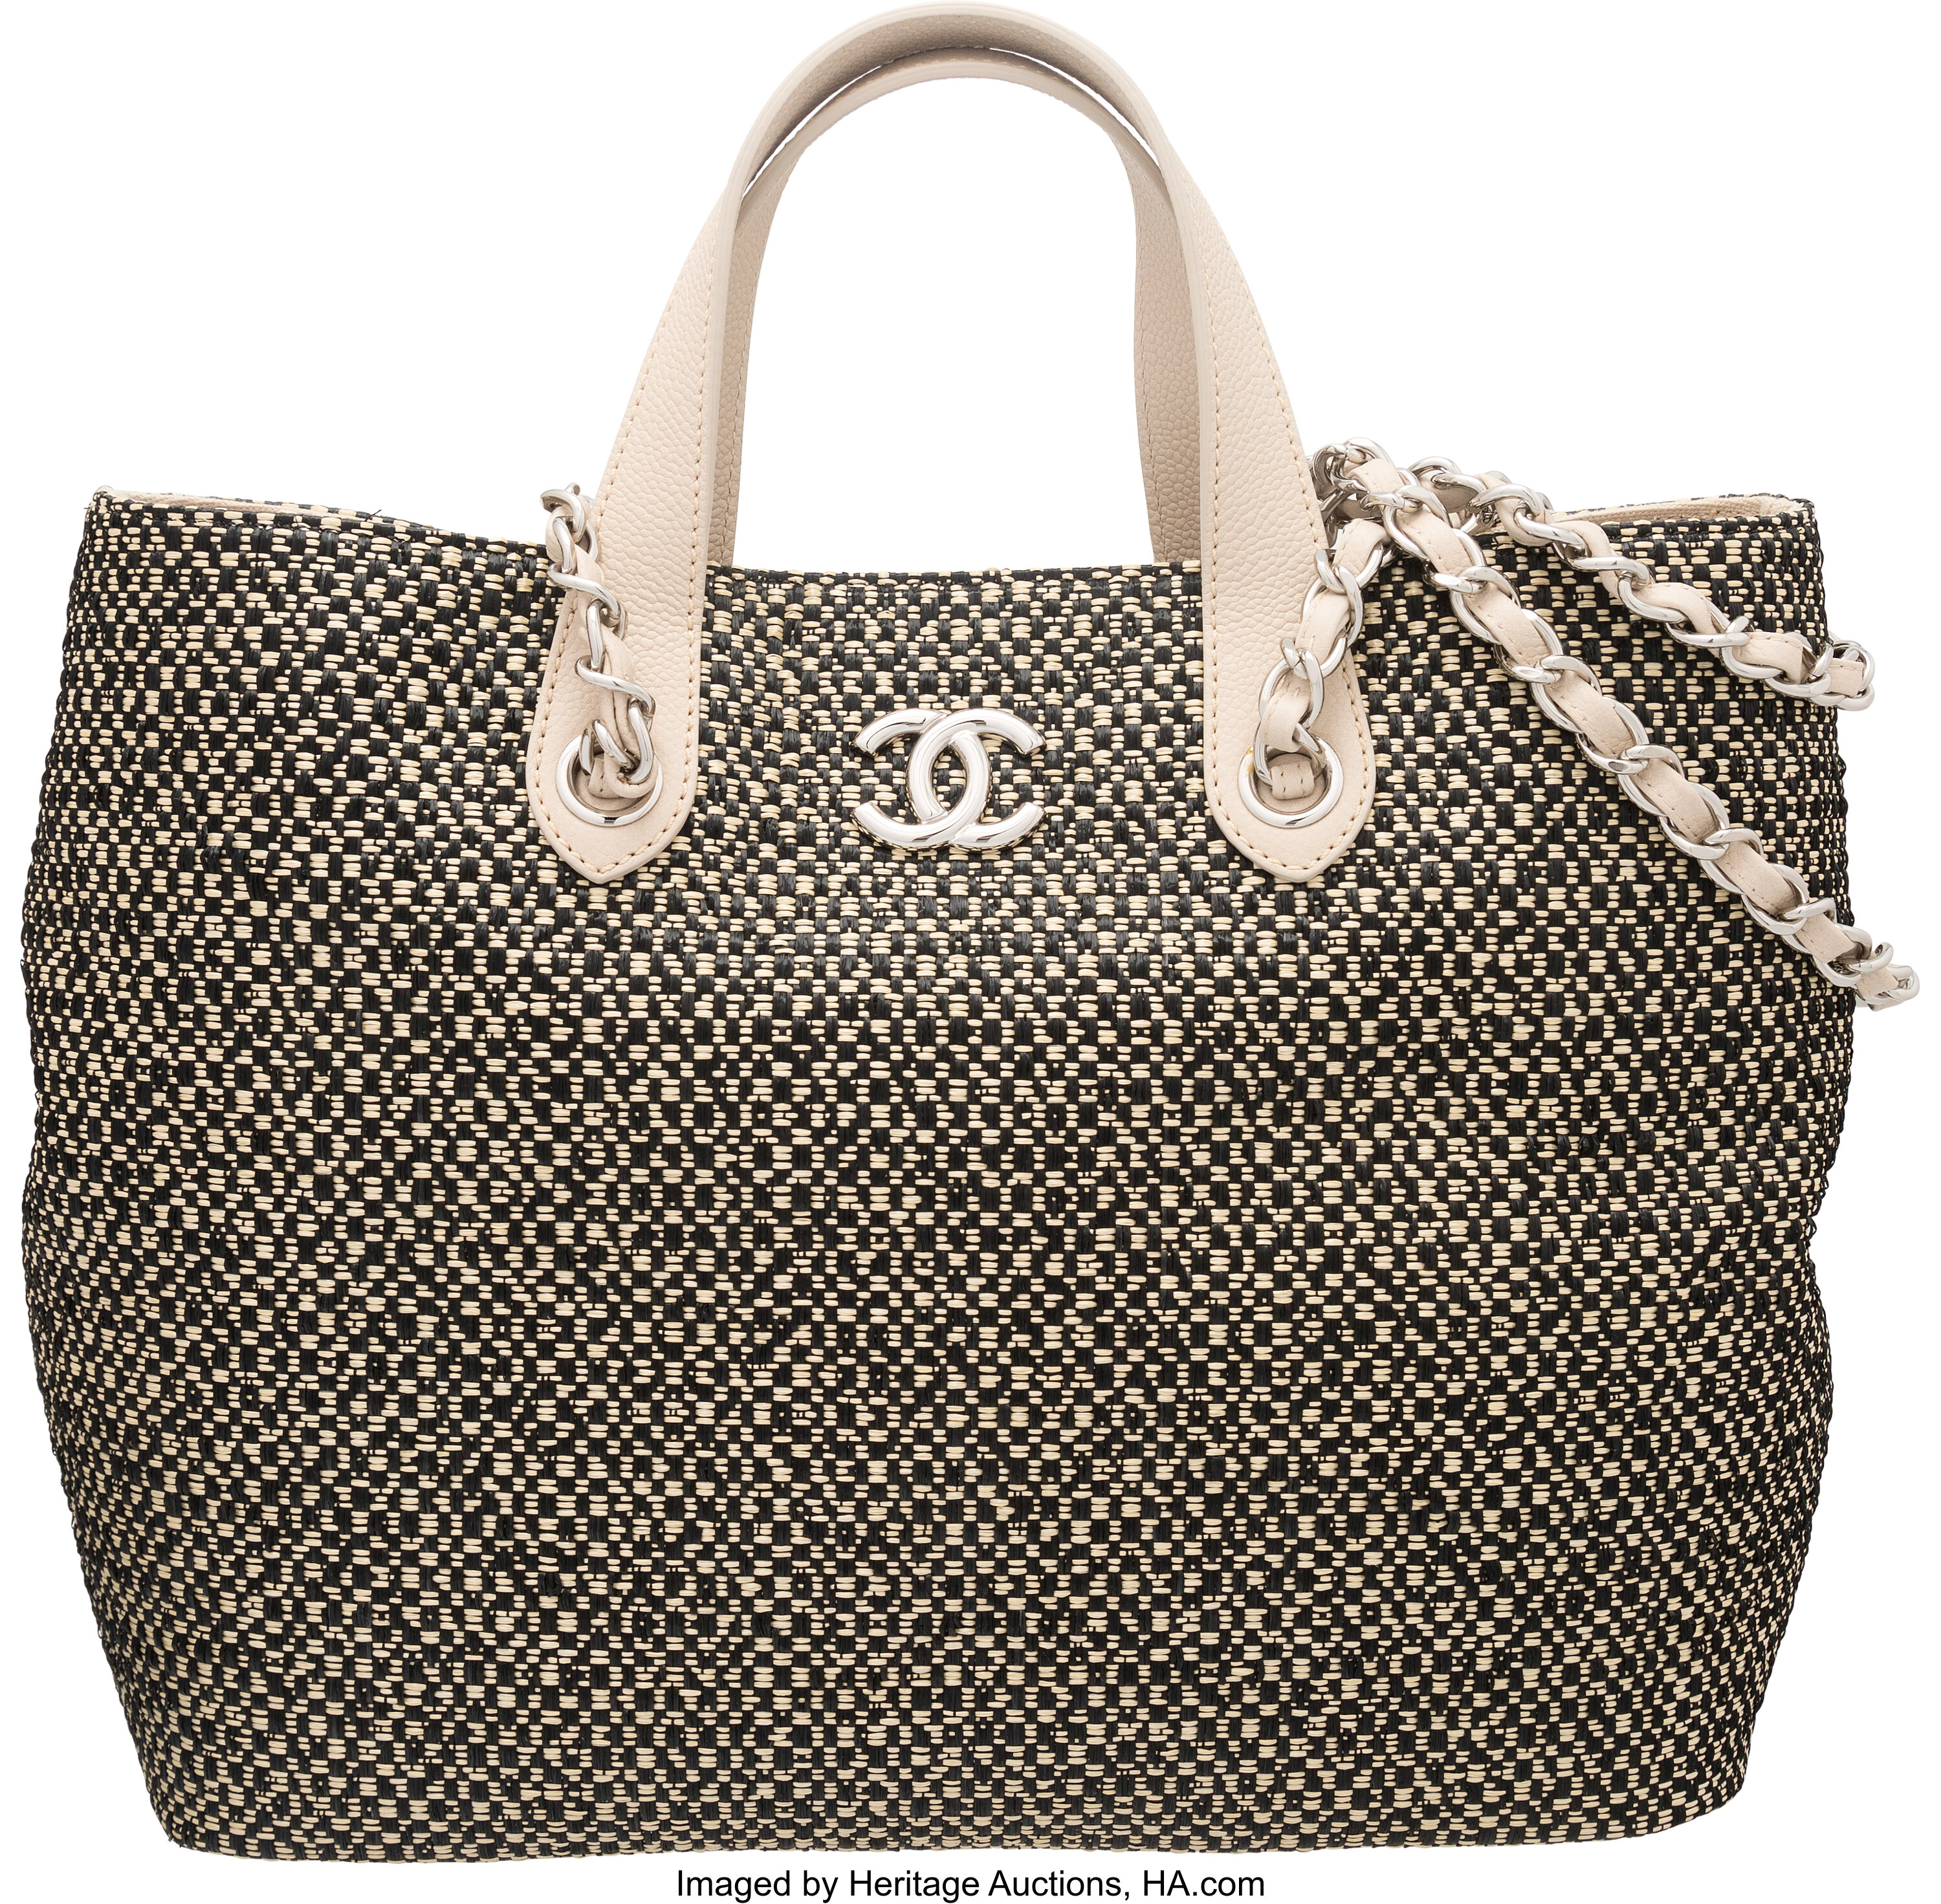 Chanel Black and Beige Woven Straw Large Shopping Tote Bag., Lot #58266